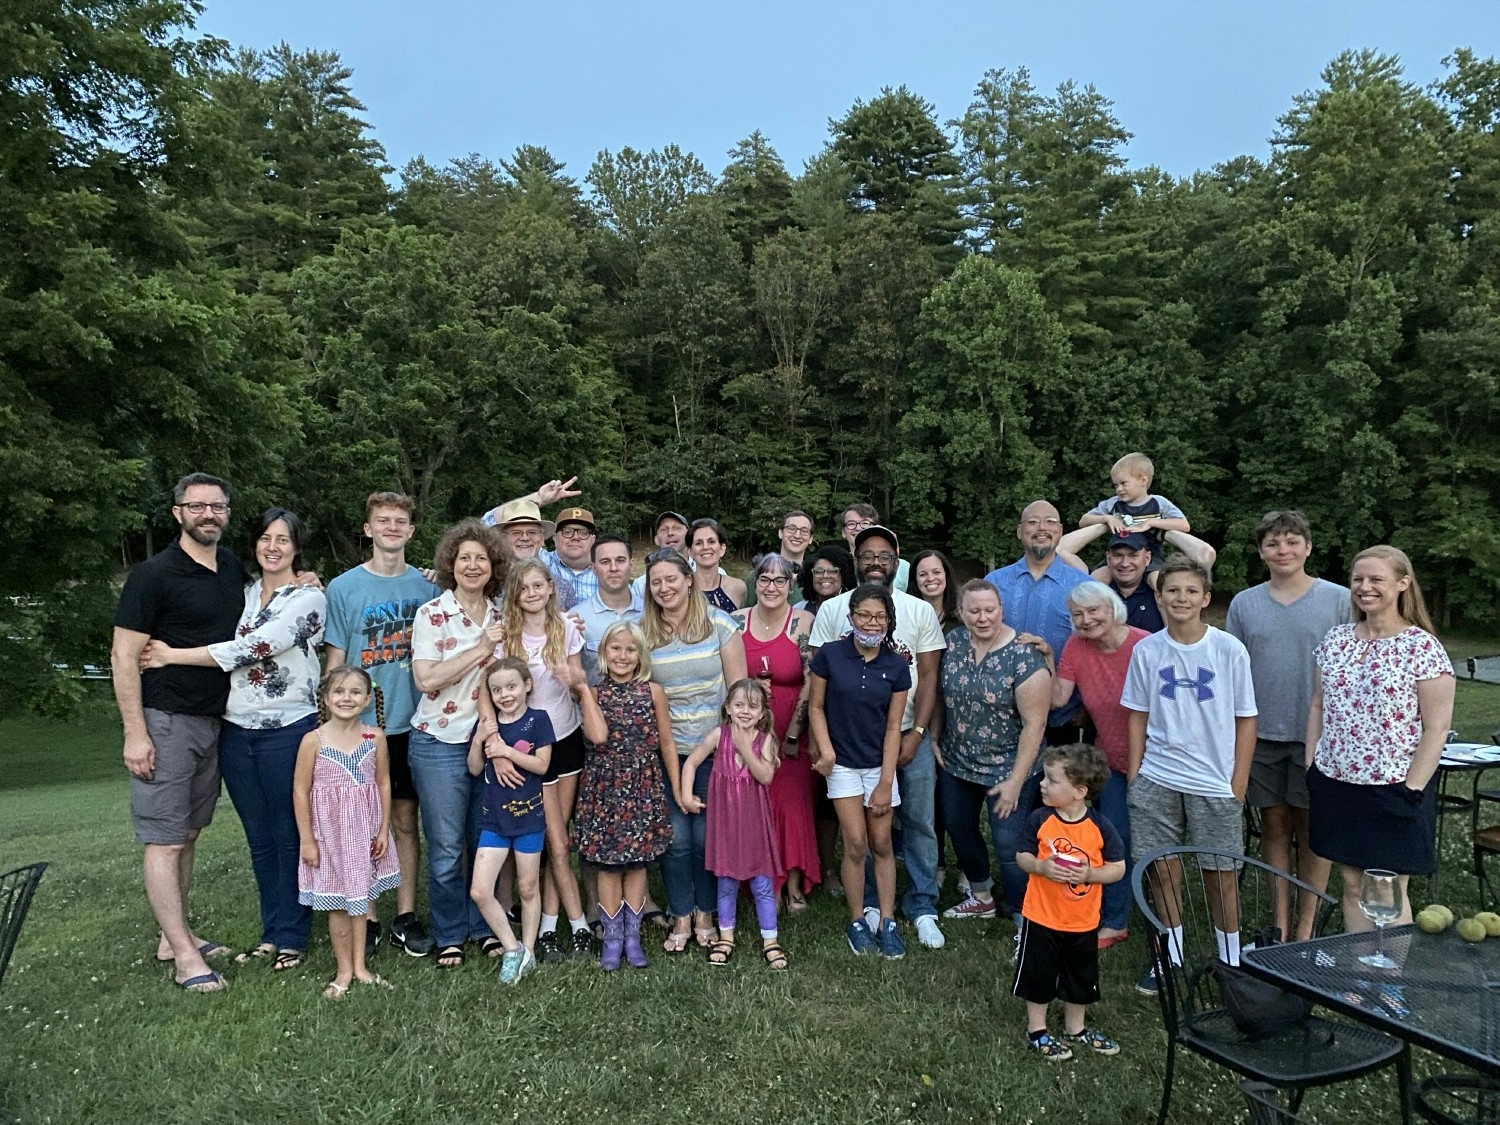 The Cerberus team and their families at a summer outdoor movie night event.